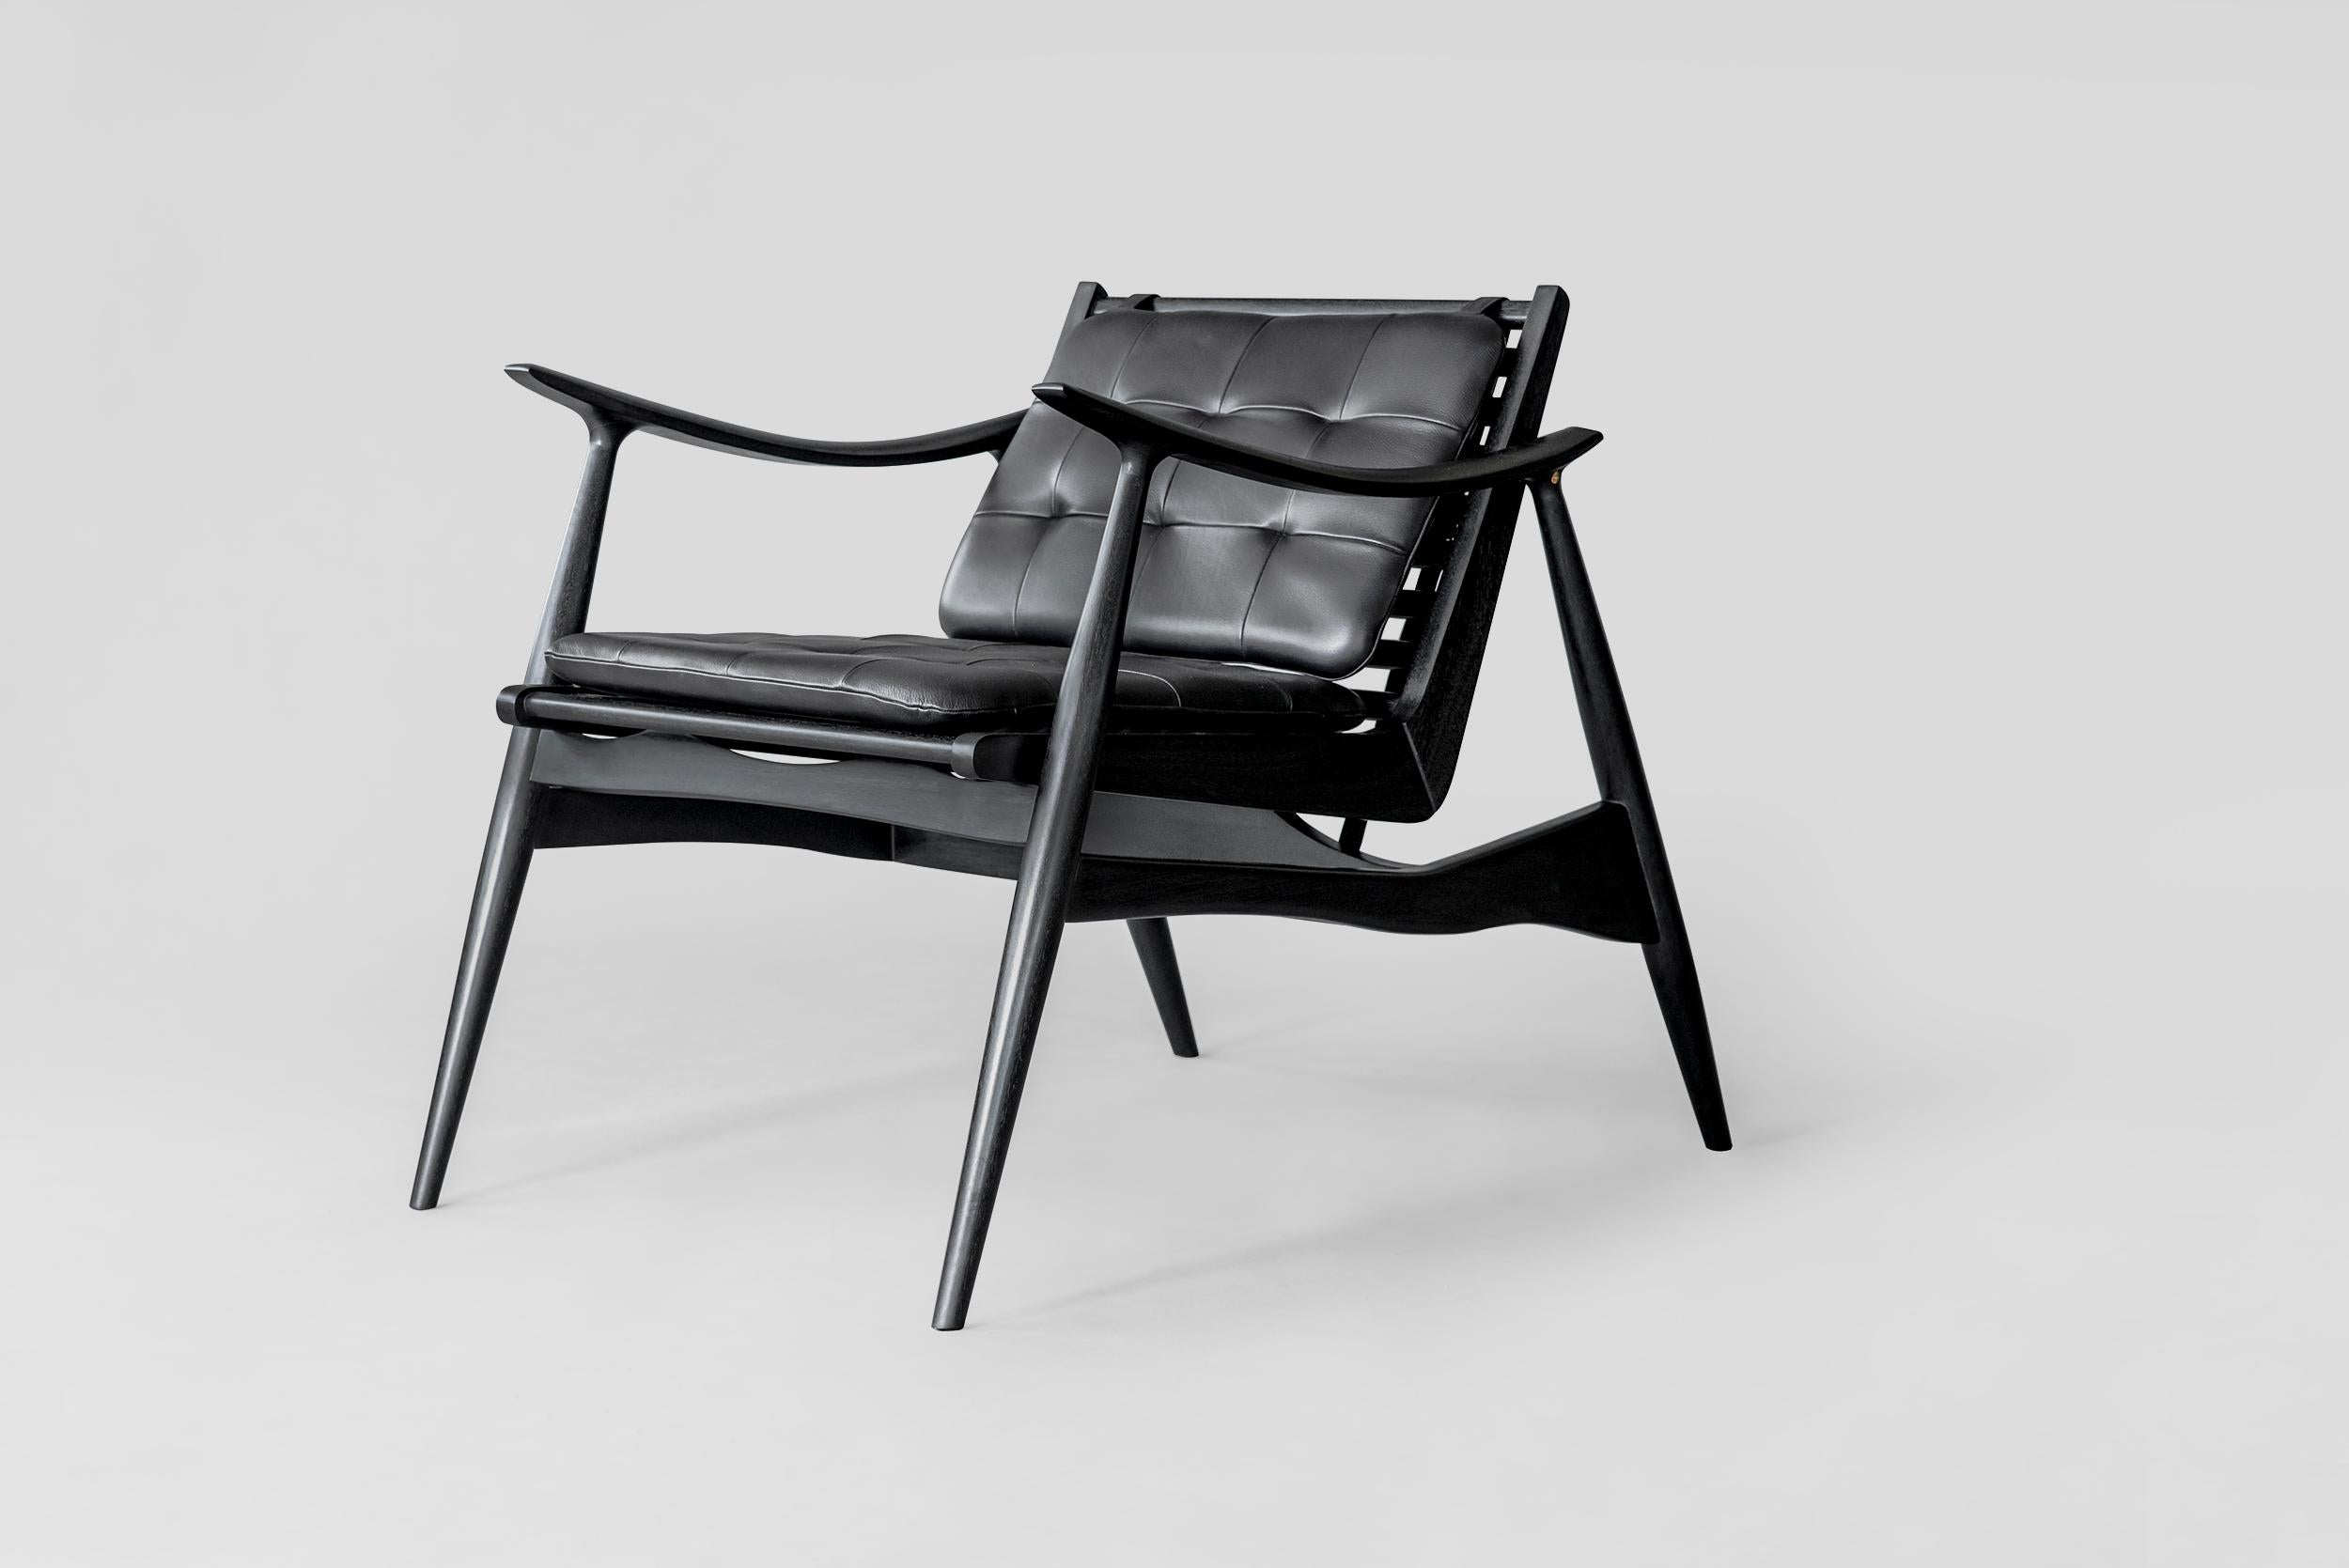 Black Atra lounge chair by Atra Design.
Dimensions: D 92 x W 66 x H 73 cm.
Materials: leather, mahogany, walnut.
Available in other colors.

Atra Design
We are Atra, a furniture brand produced by Atra form a mexico city–based high end